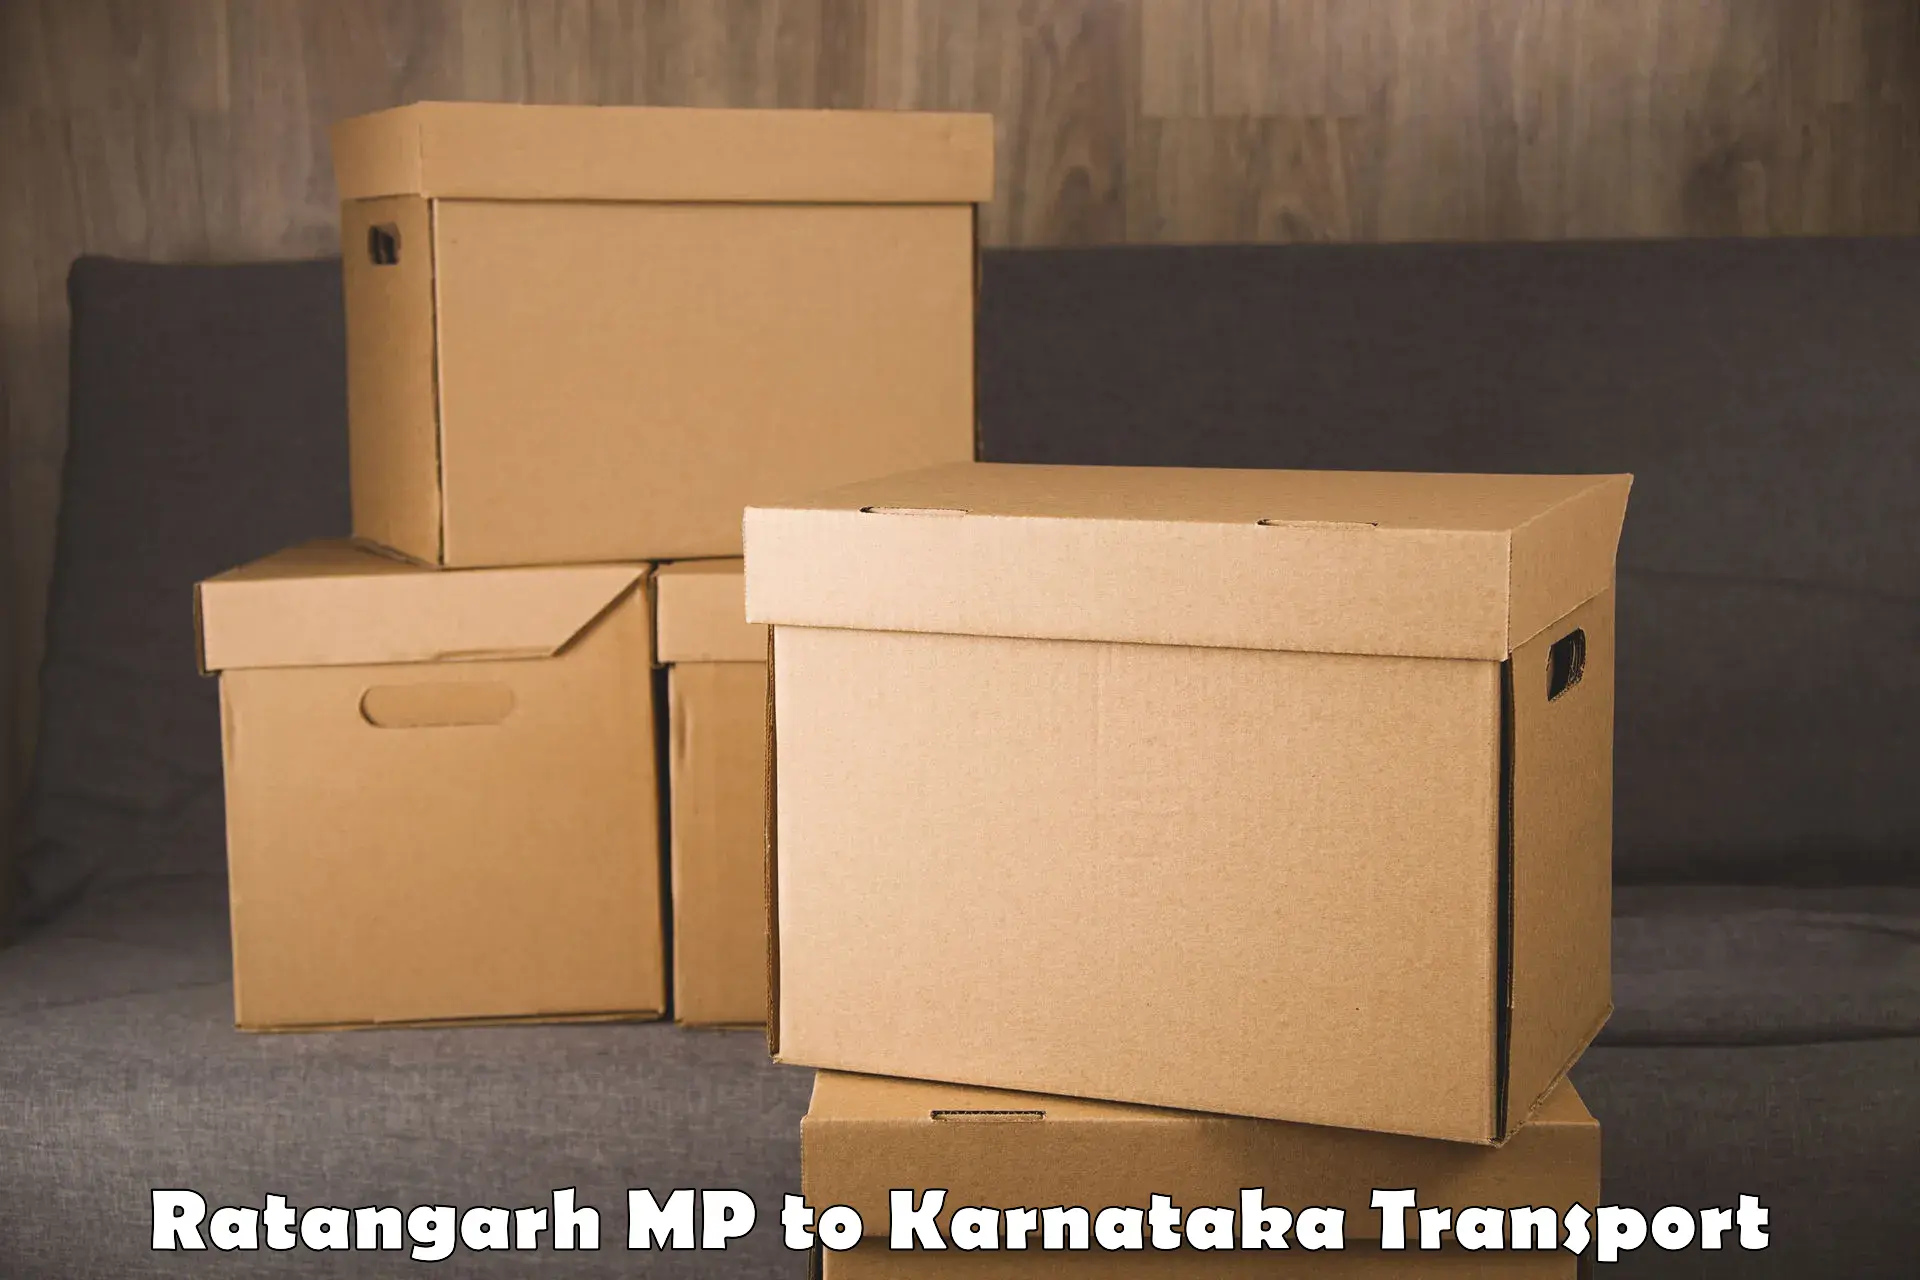 Delivery service Ratangarh MP to Yadgir